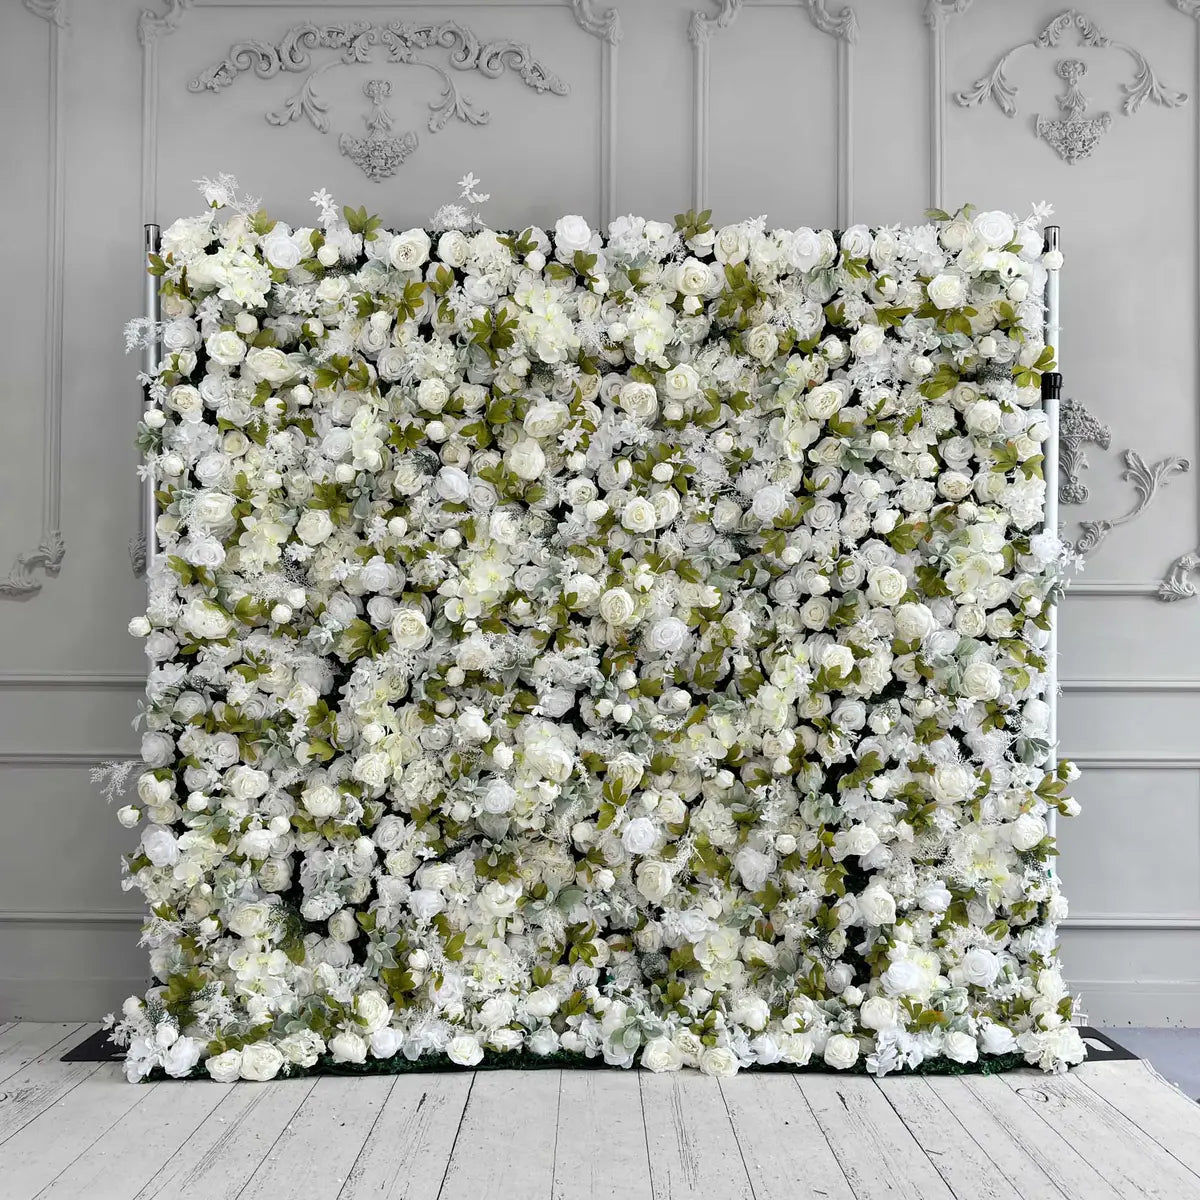 RTS Flower Wall 3D White Peony Fabric Rolling Up Curtain Floral Backdrop Wedding Party Proposal Decor